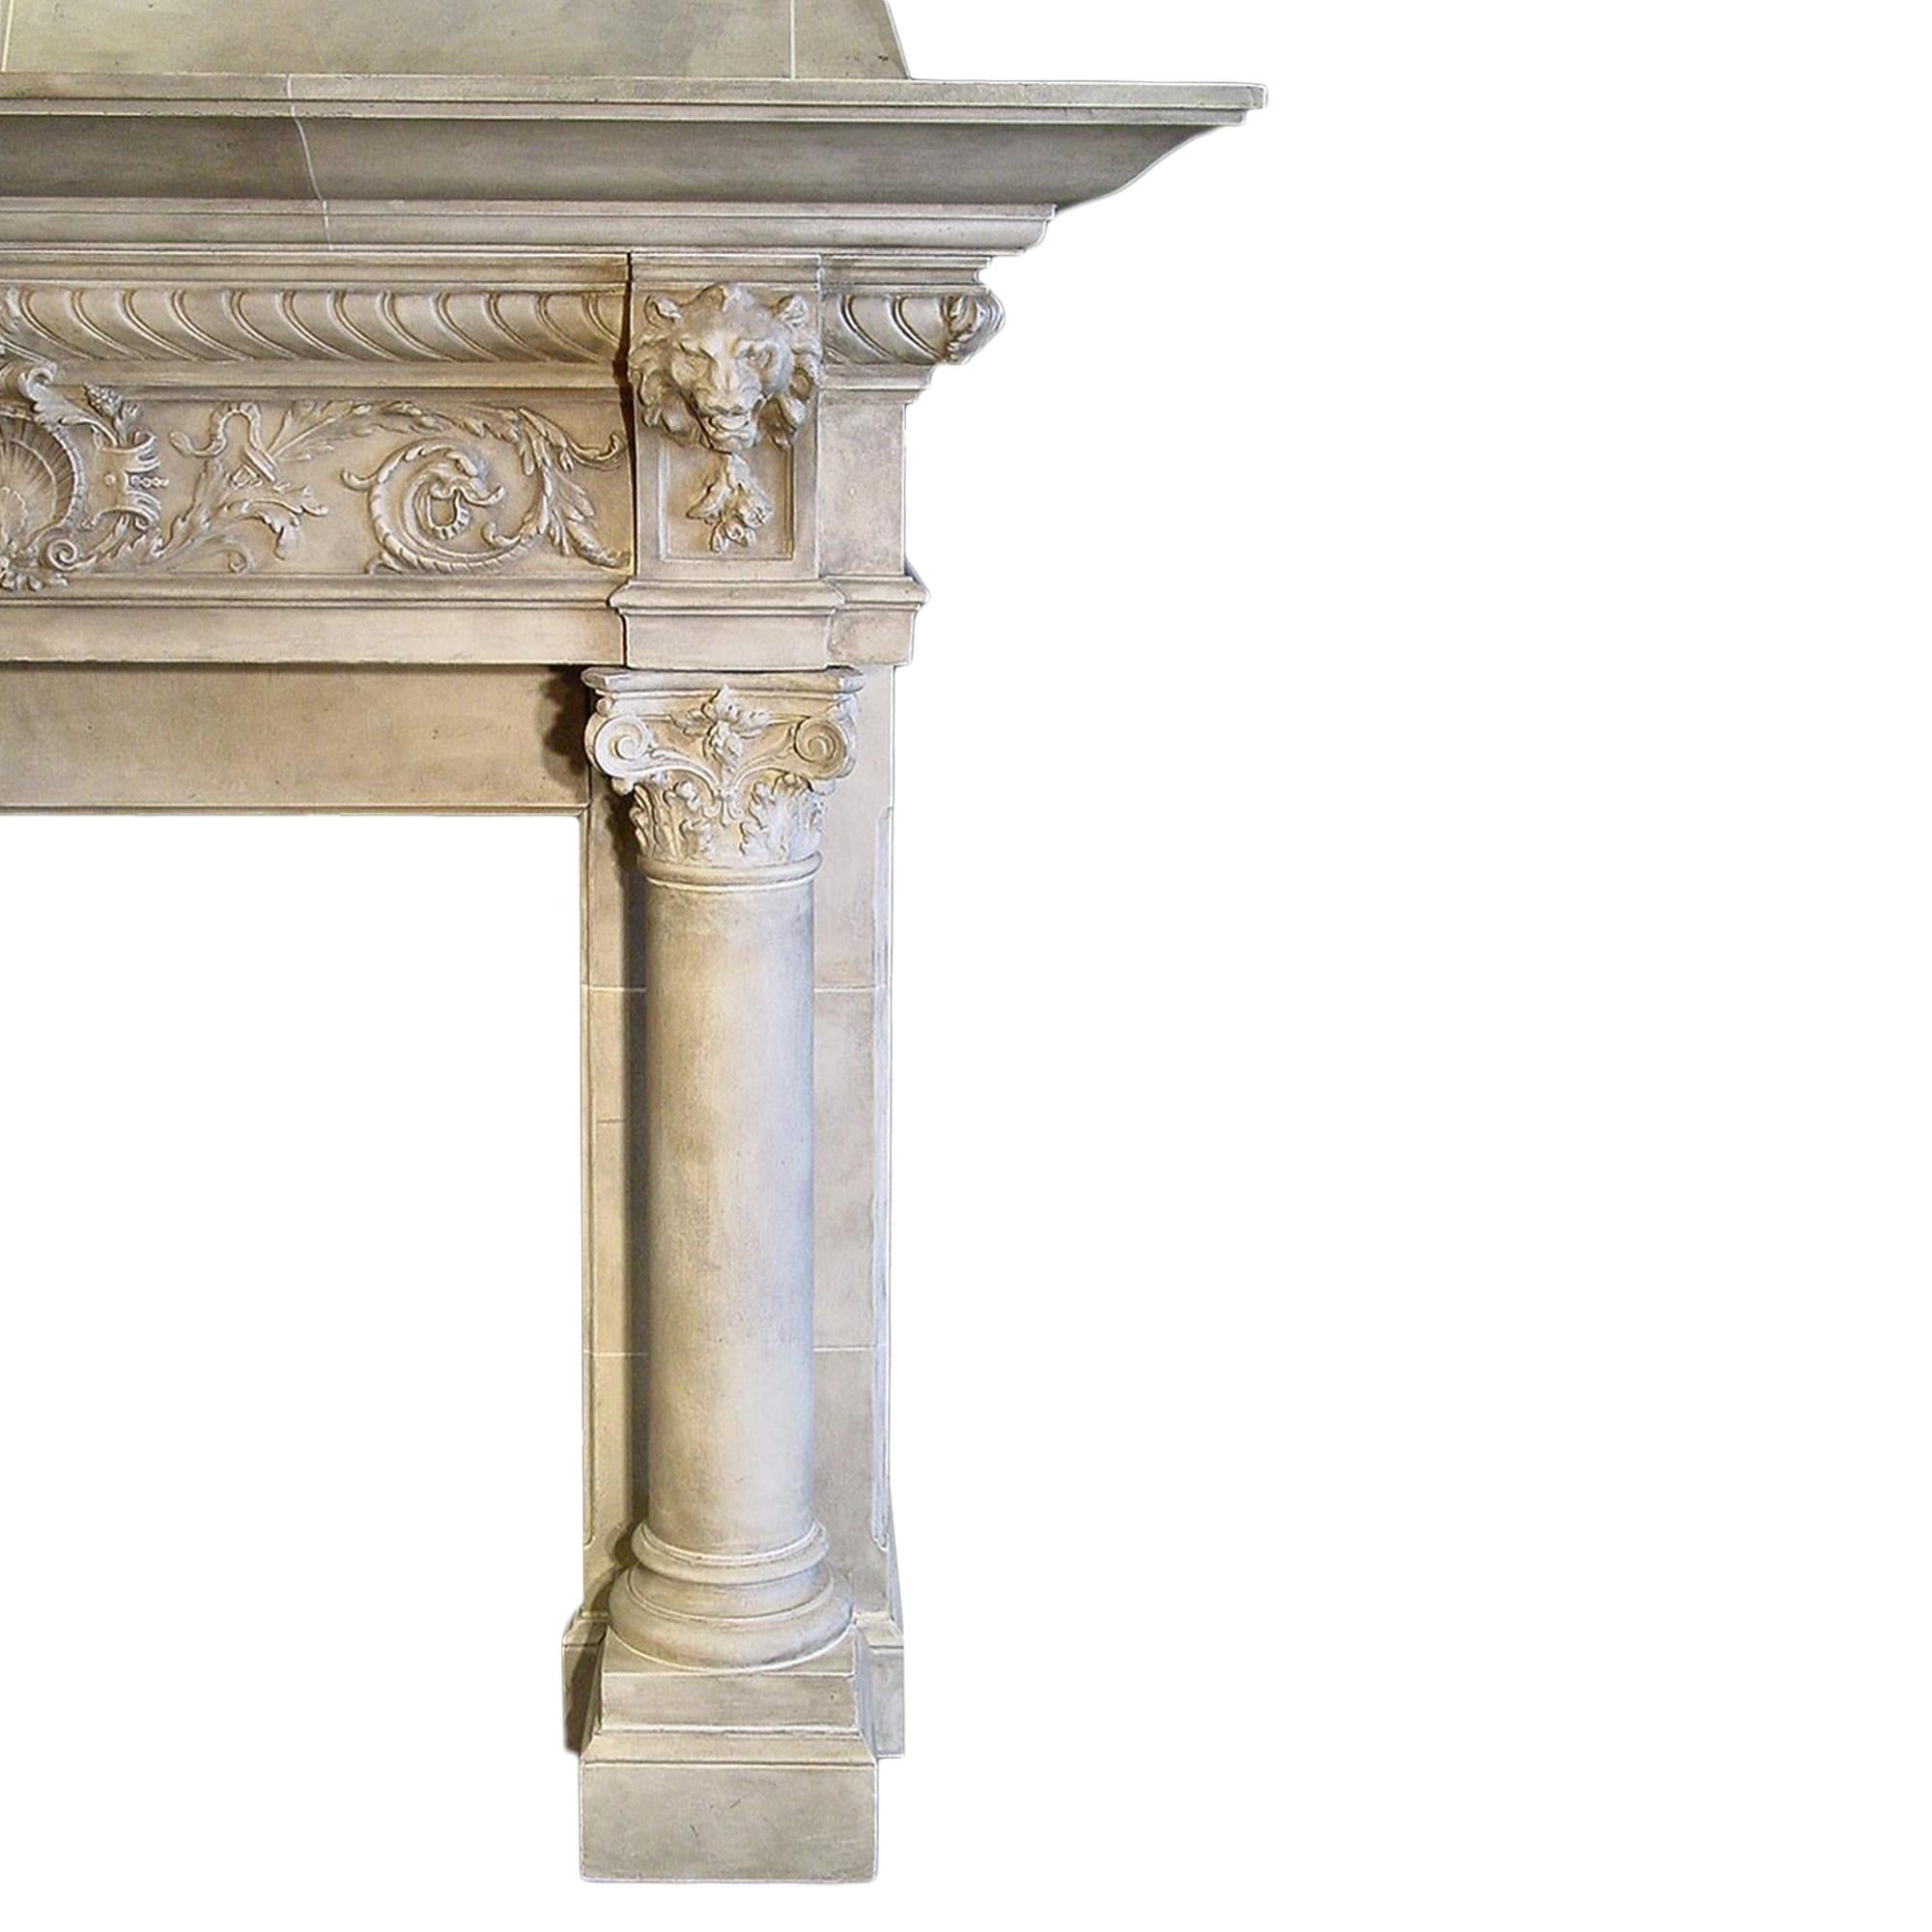 An important French 19th century Medieval st. patinated mantel with faux limestone finish. The mantel has two circular columns with impressive plaster capitals. The façade has richly carved lion heads with a central reserve of a shell amidst floral